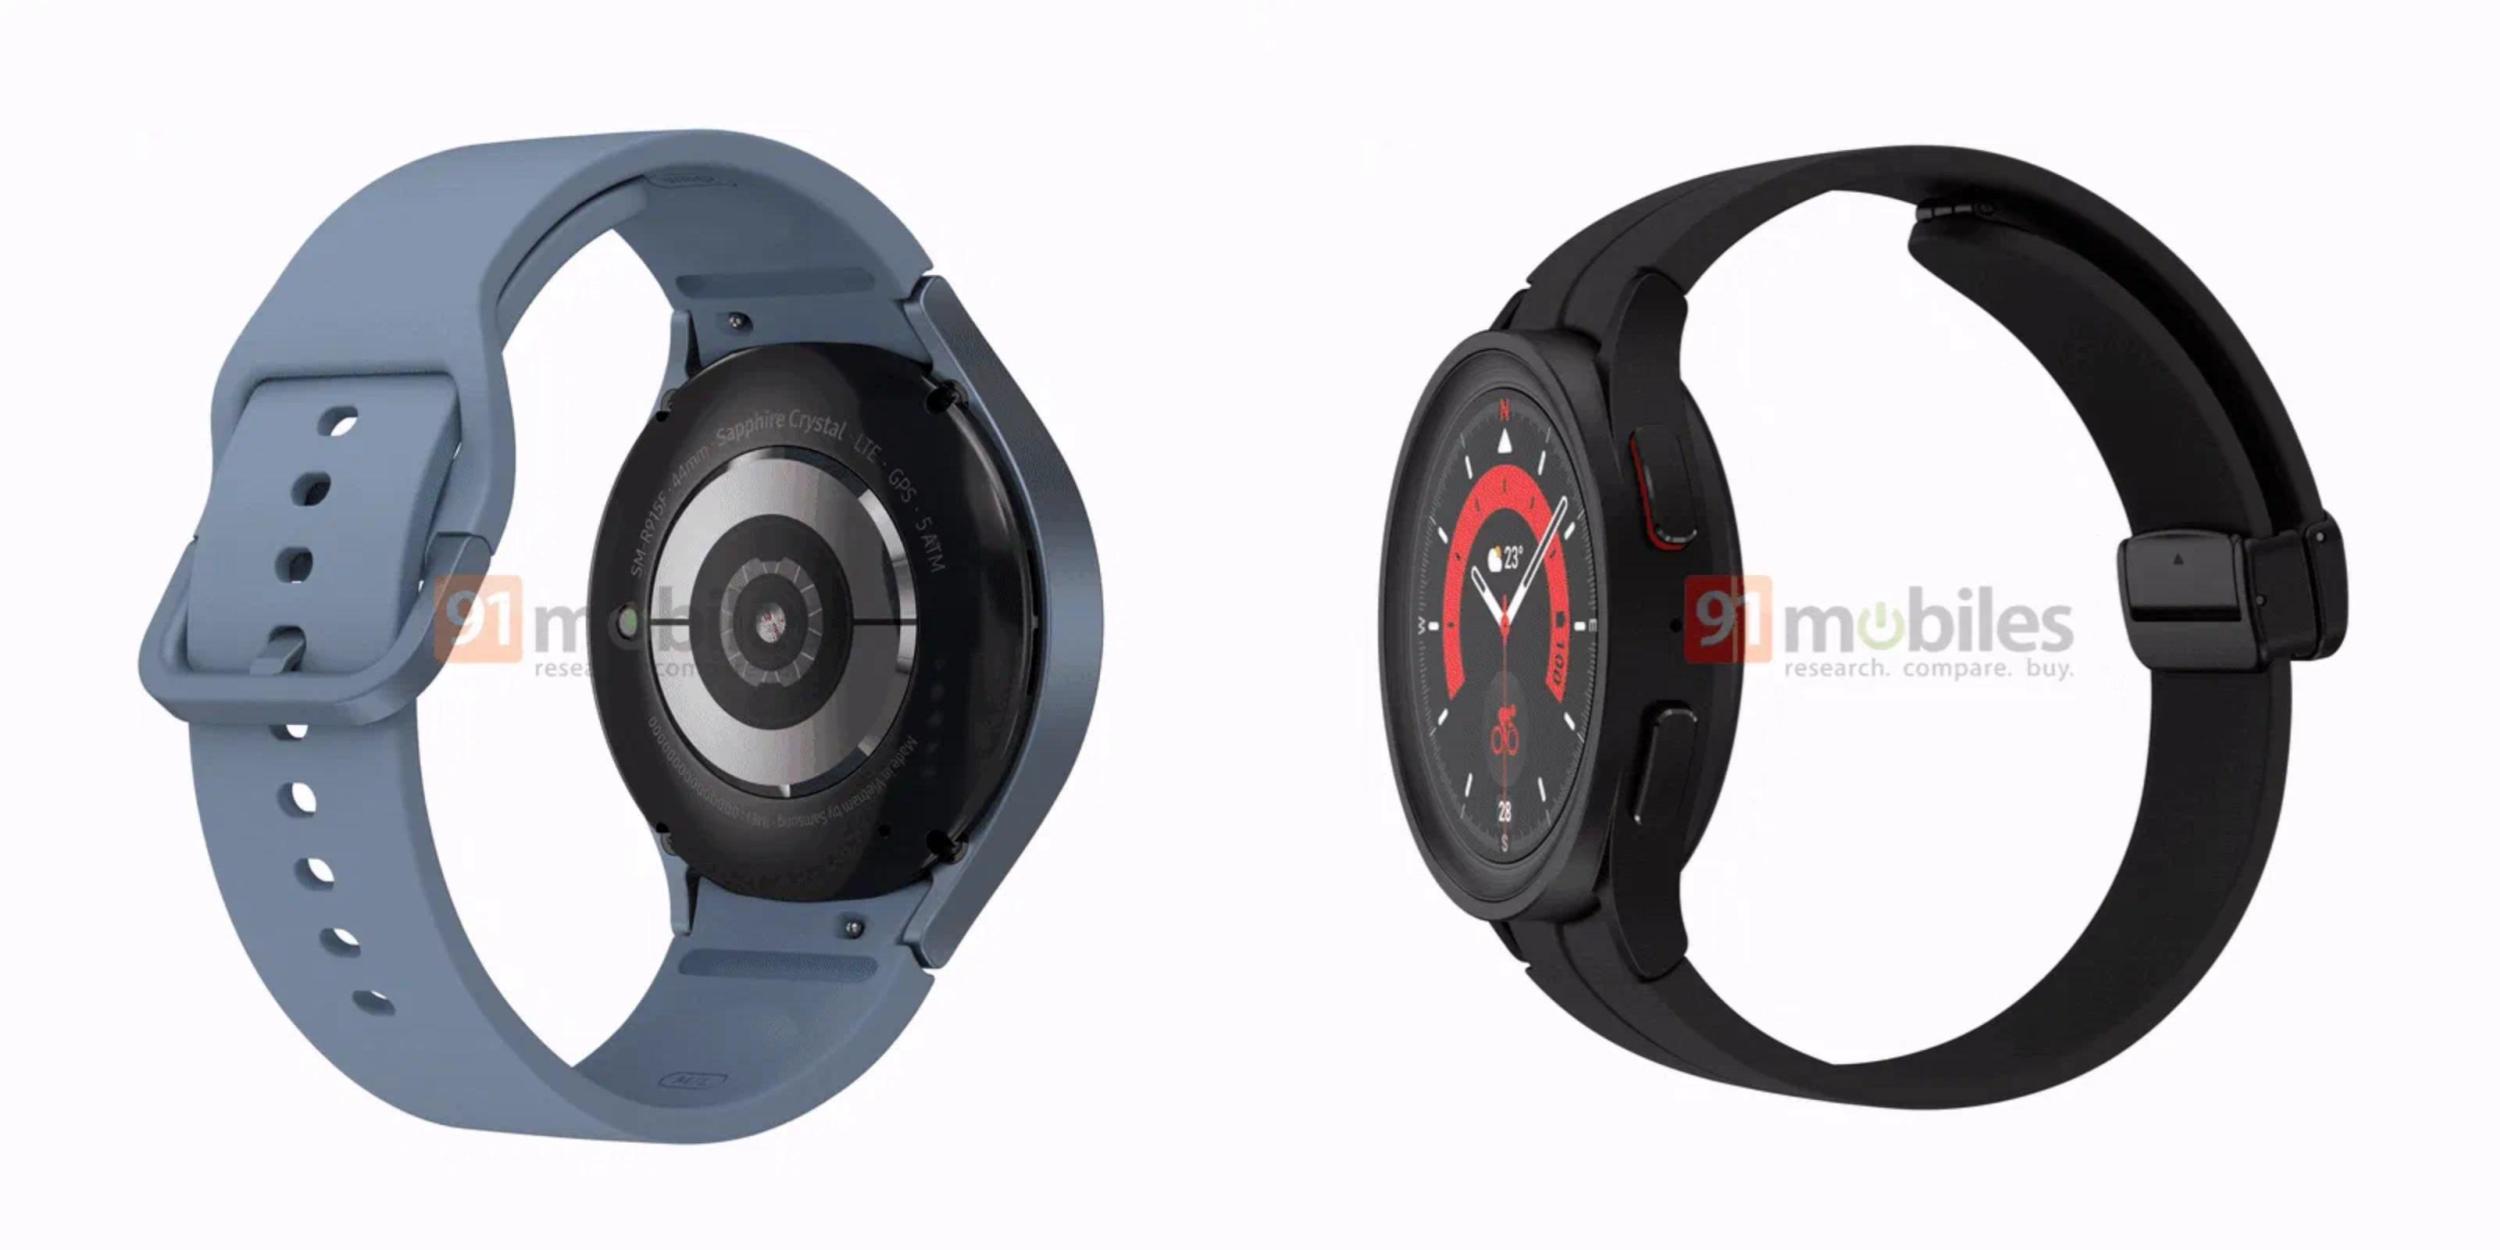 Official Samsung Galaxy Watch 5 prices and release details revealed -  SamMobile